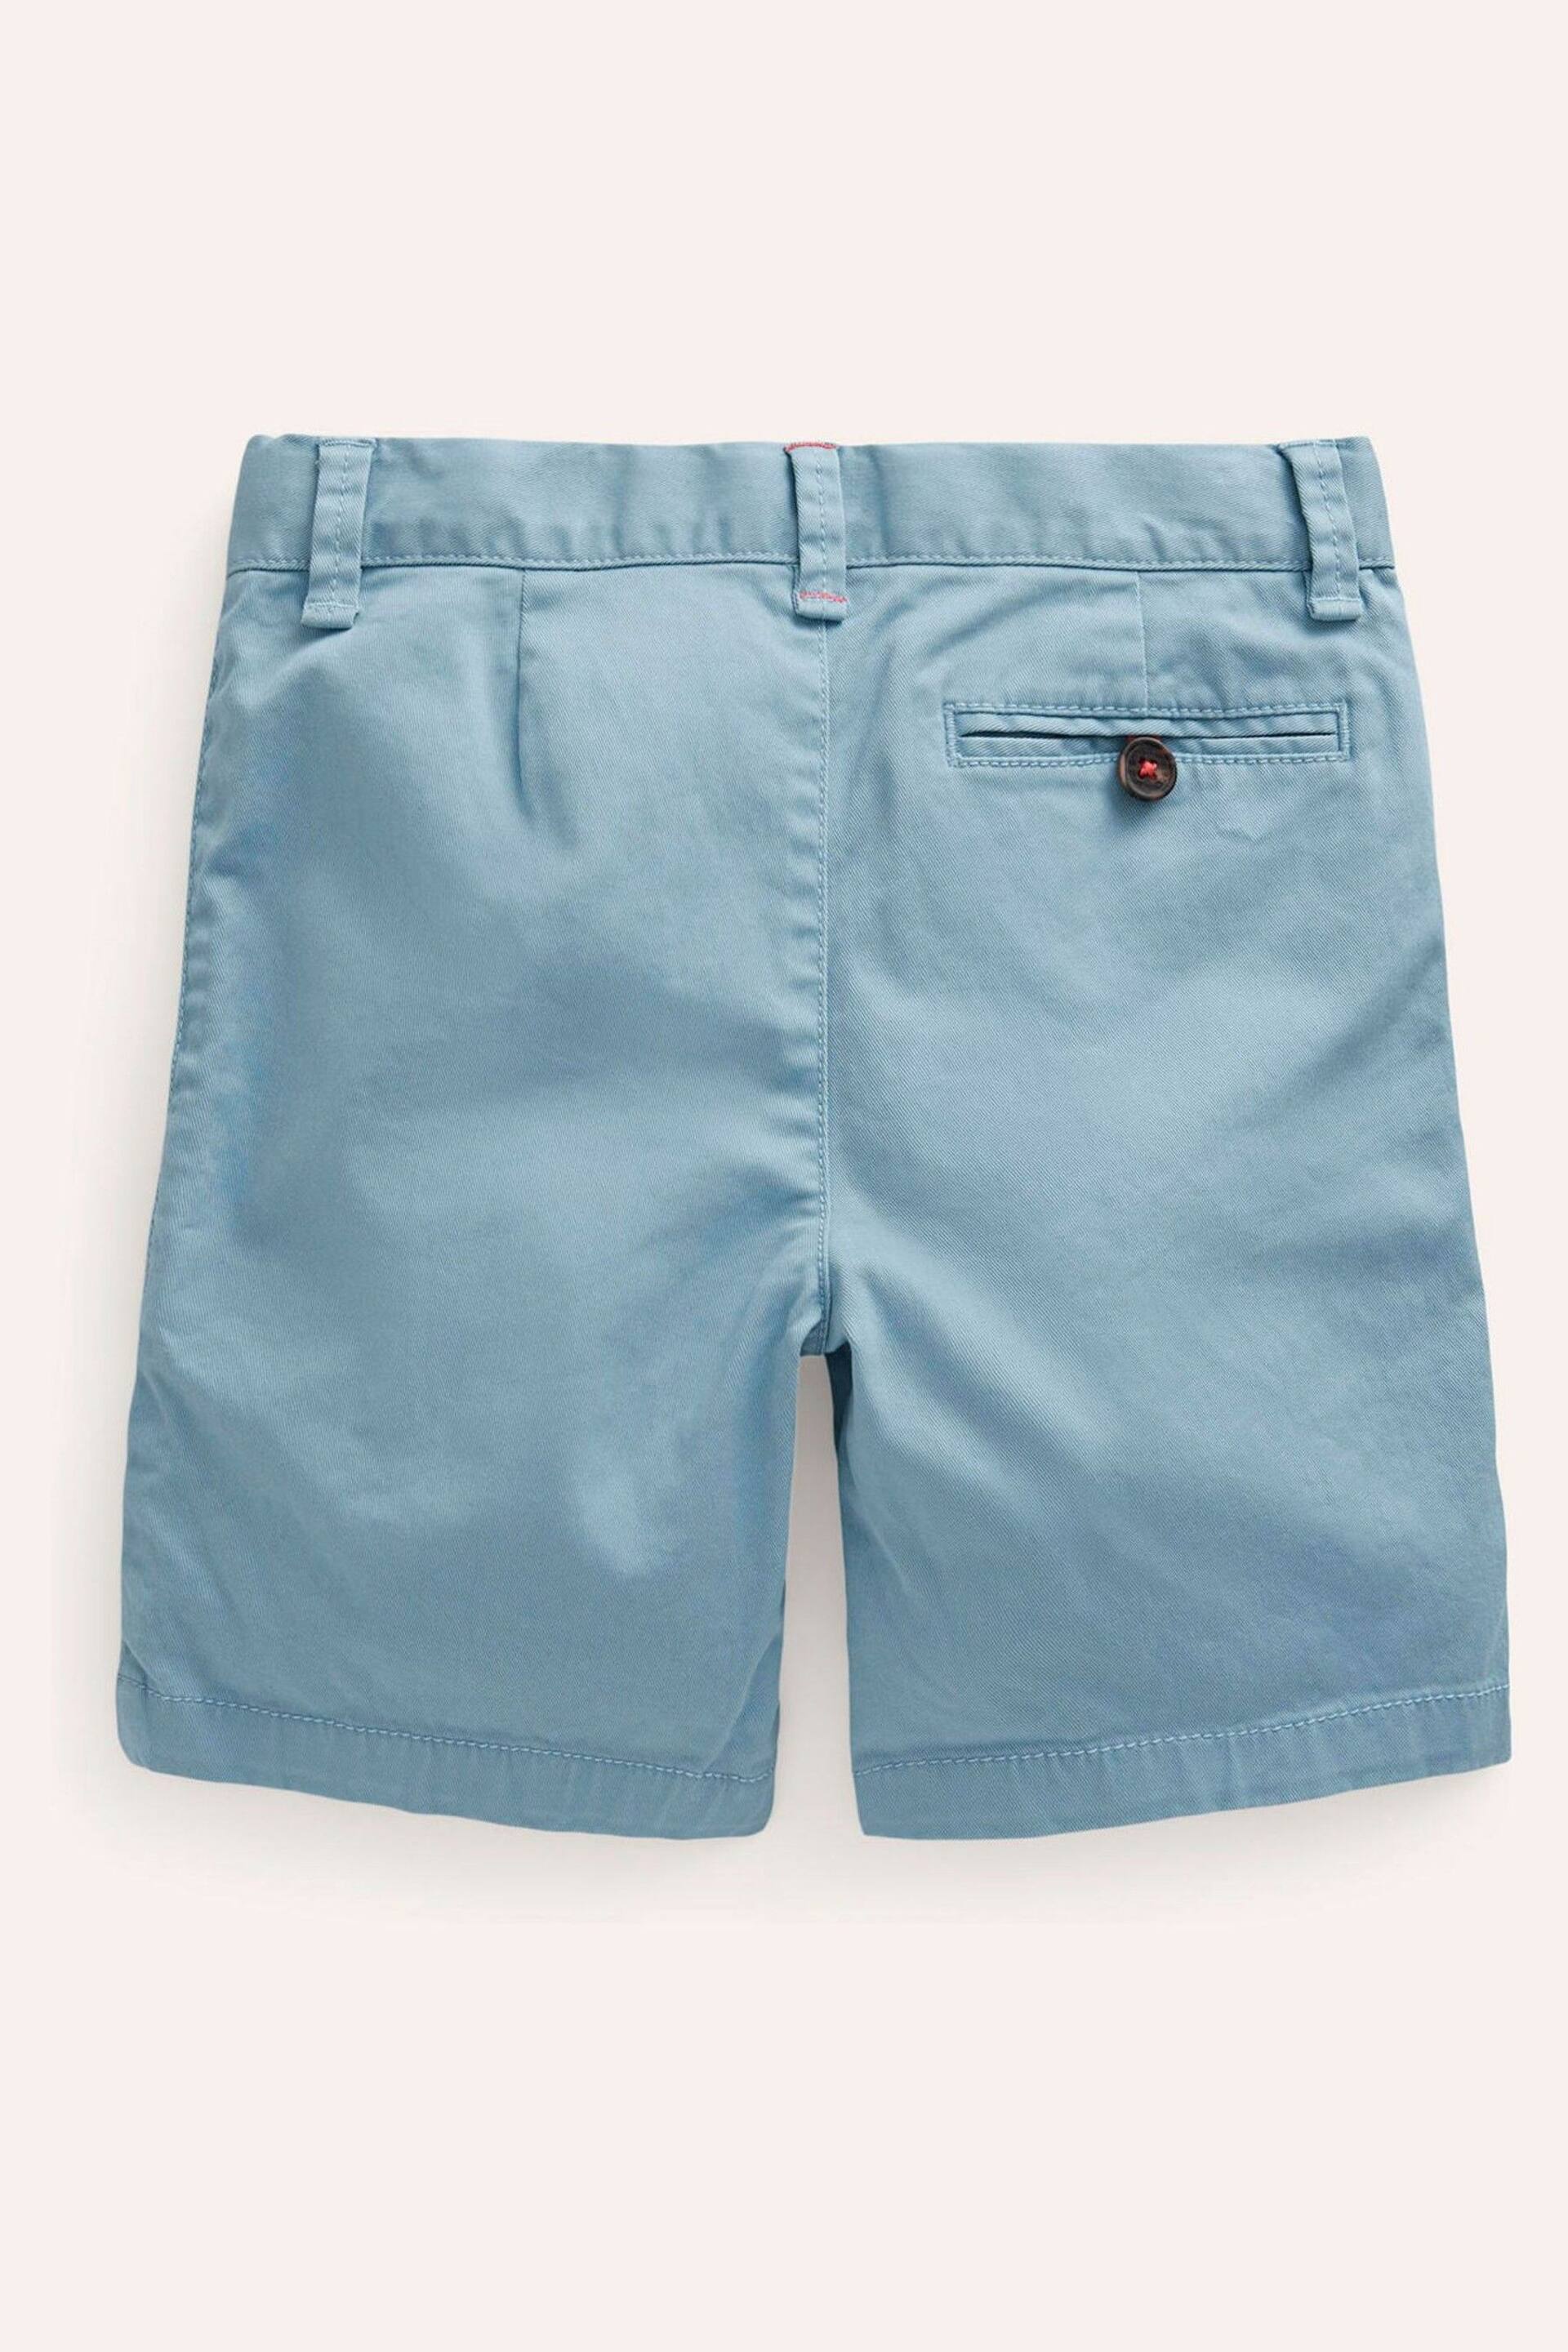 Boden Blue Classic Chino Shorts - Image 2 of 3